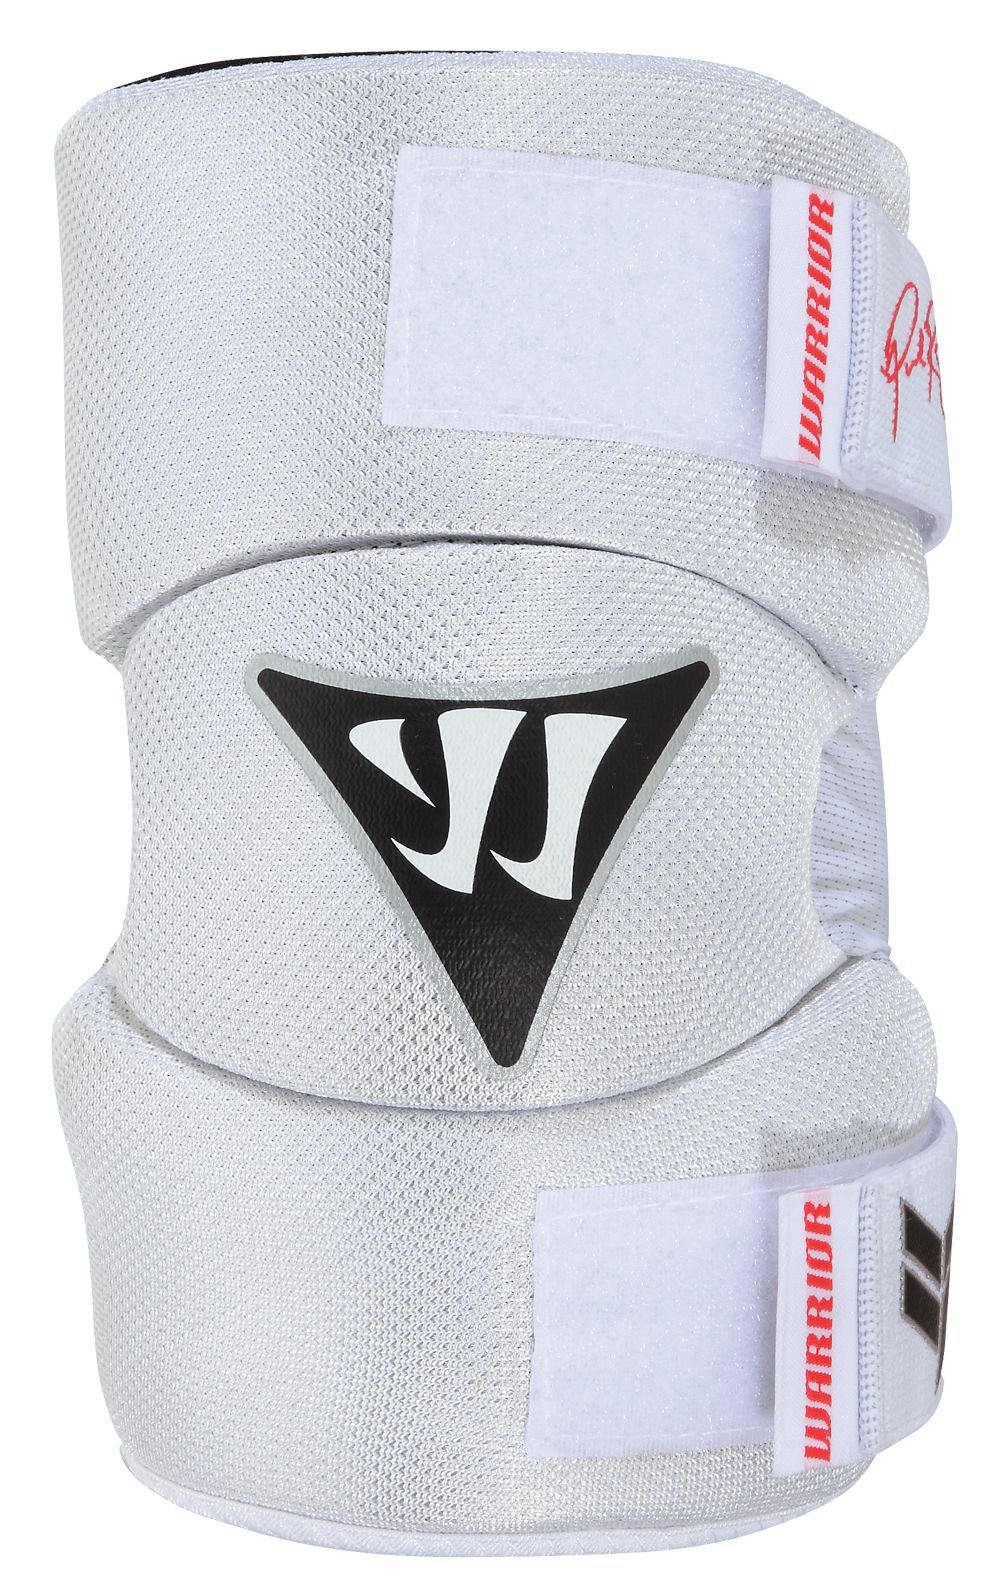 Rabil Next Arm Pad, White with Red & Blue image number 0